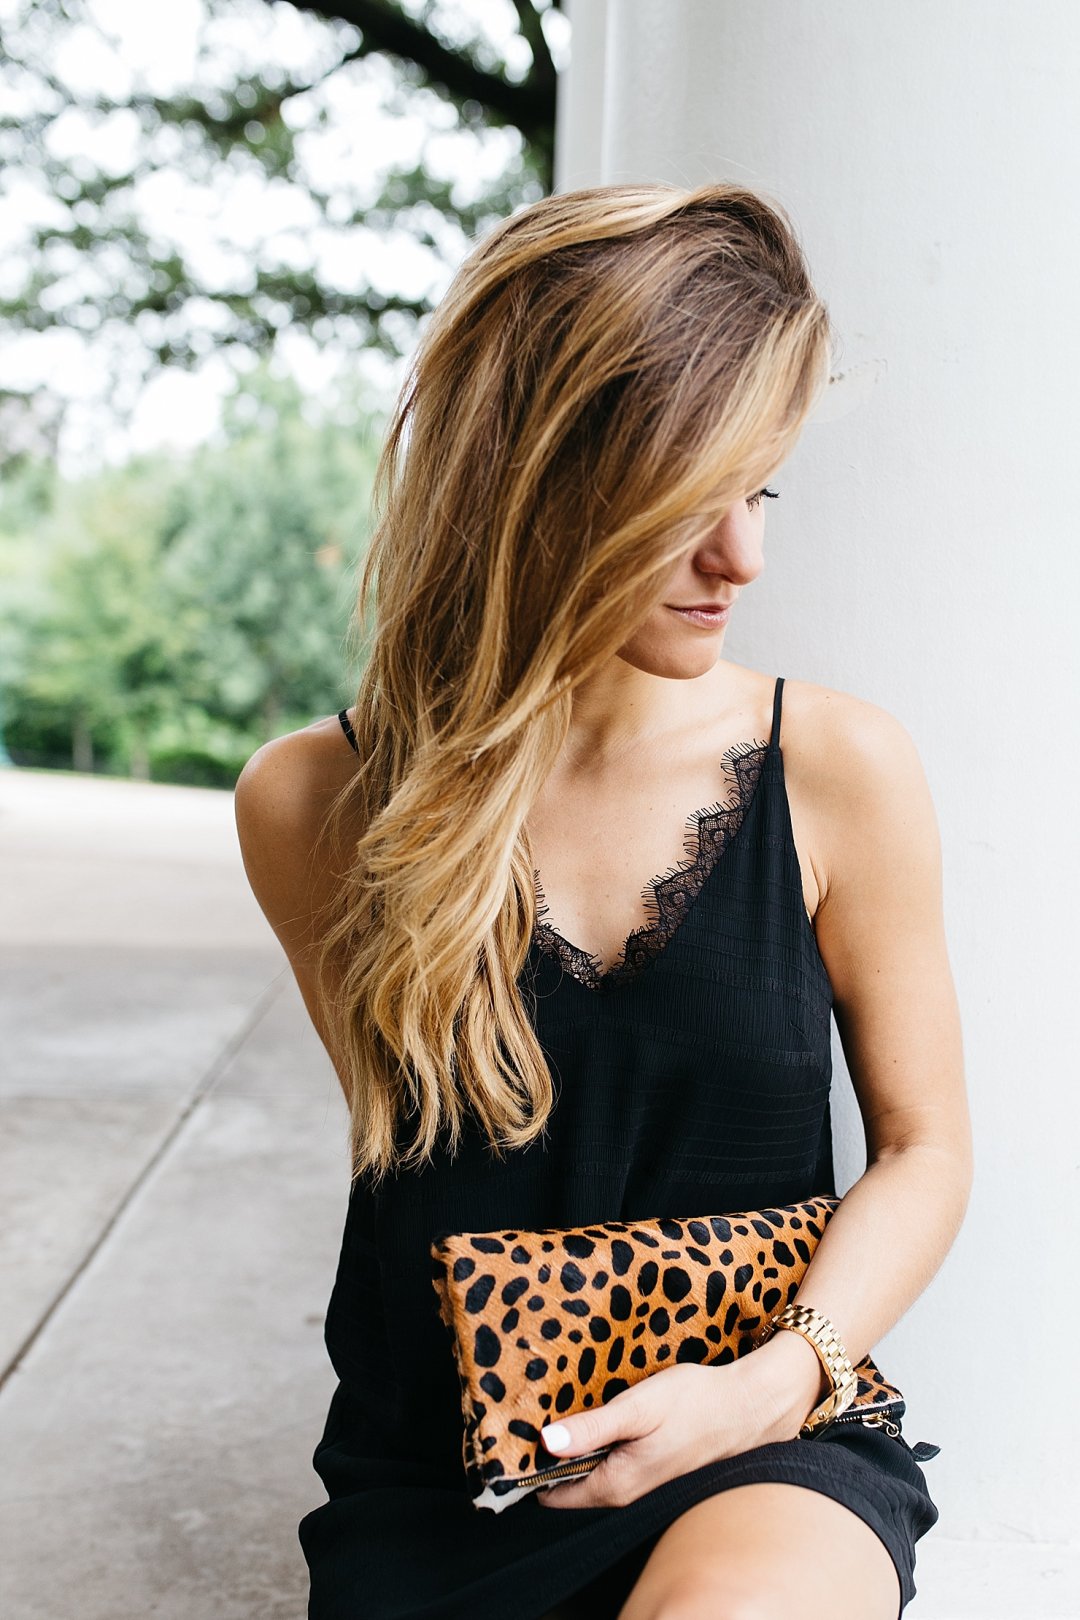 All about my hair extensions // wearing a little black slip dress with a leopard print clutch // summer going out outfit // wearing black and brown together for summer